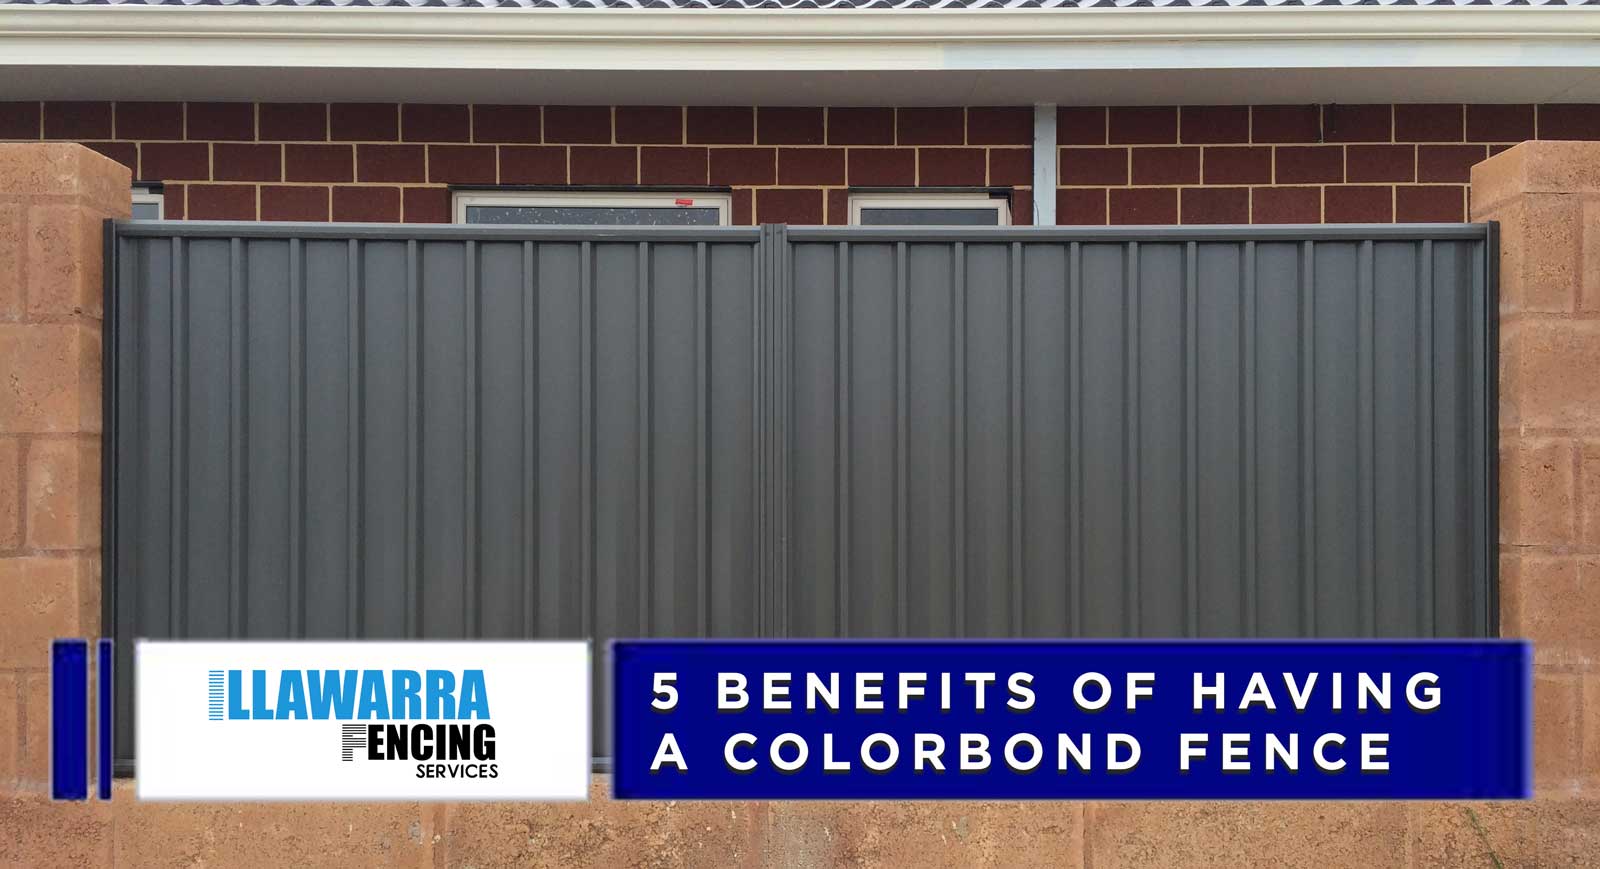 5 BENEFITS OF HAVING A COLORBOND FENCE